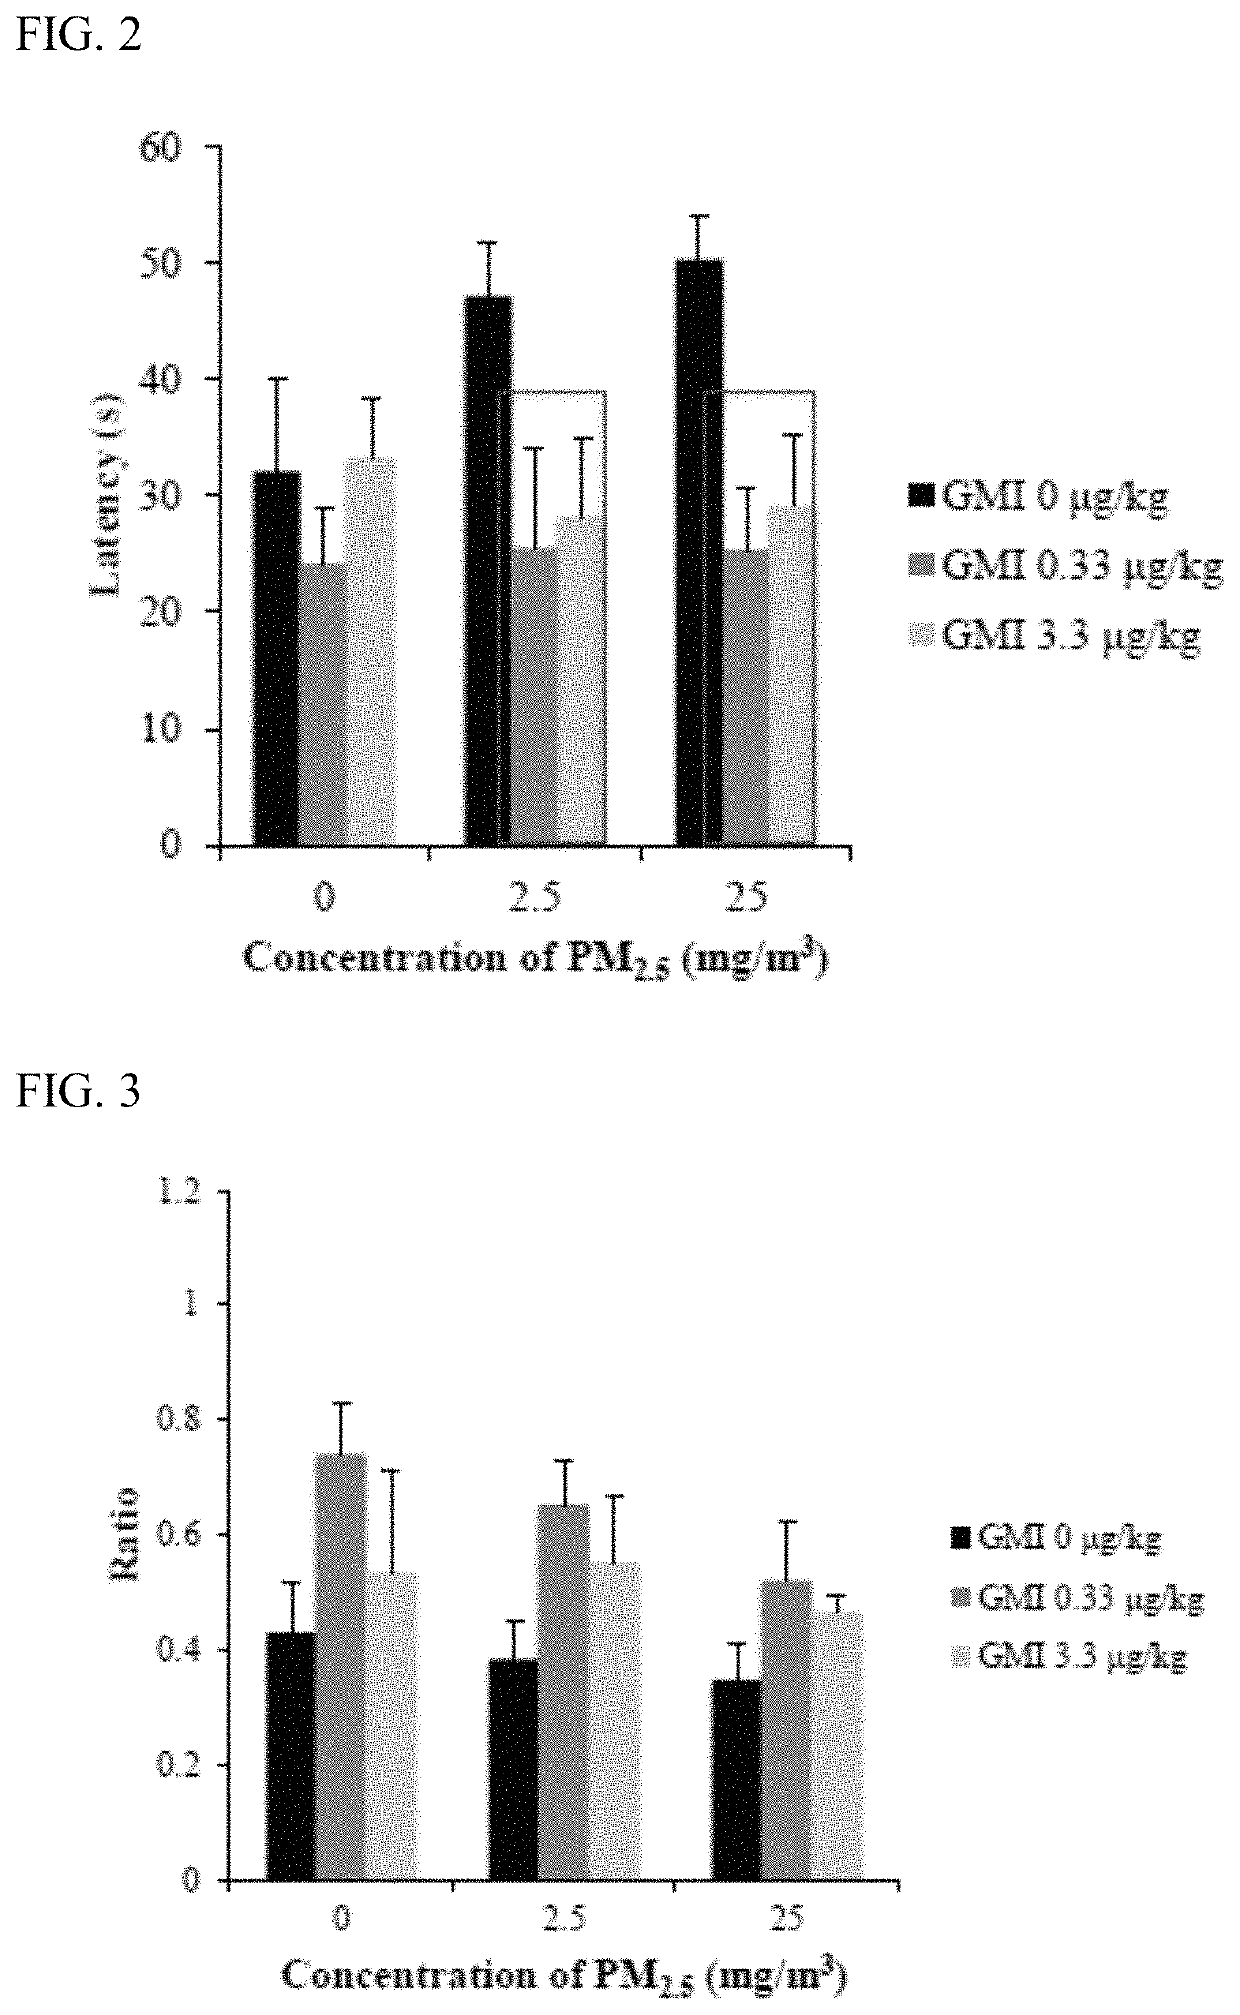 Use of an immunomodulatory protein in reducing damage caused by fine particulate matter